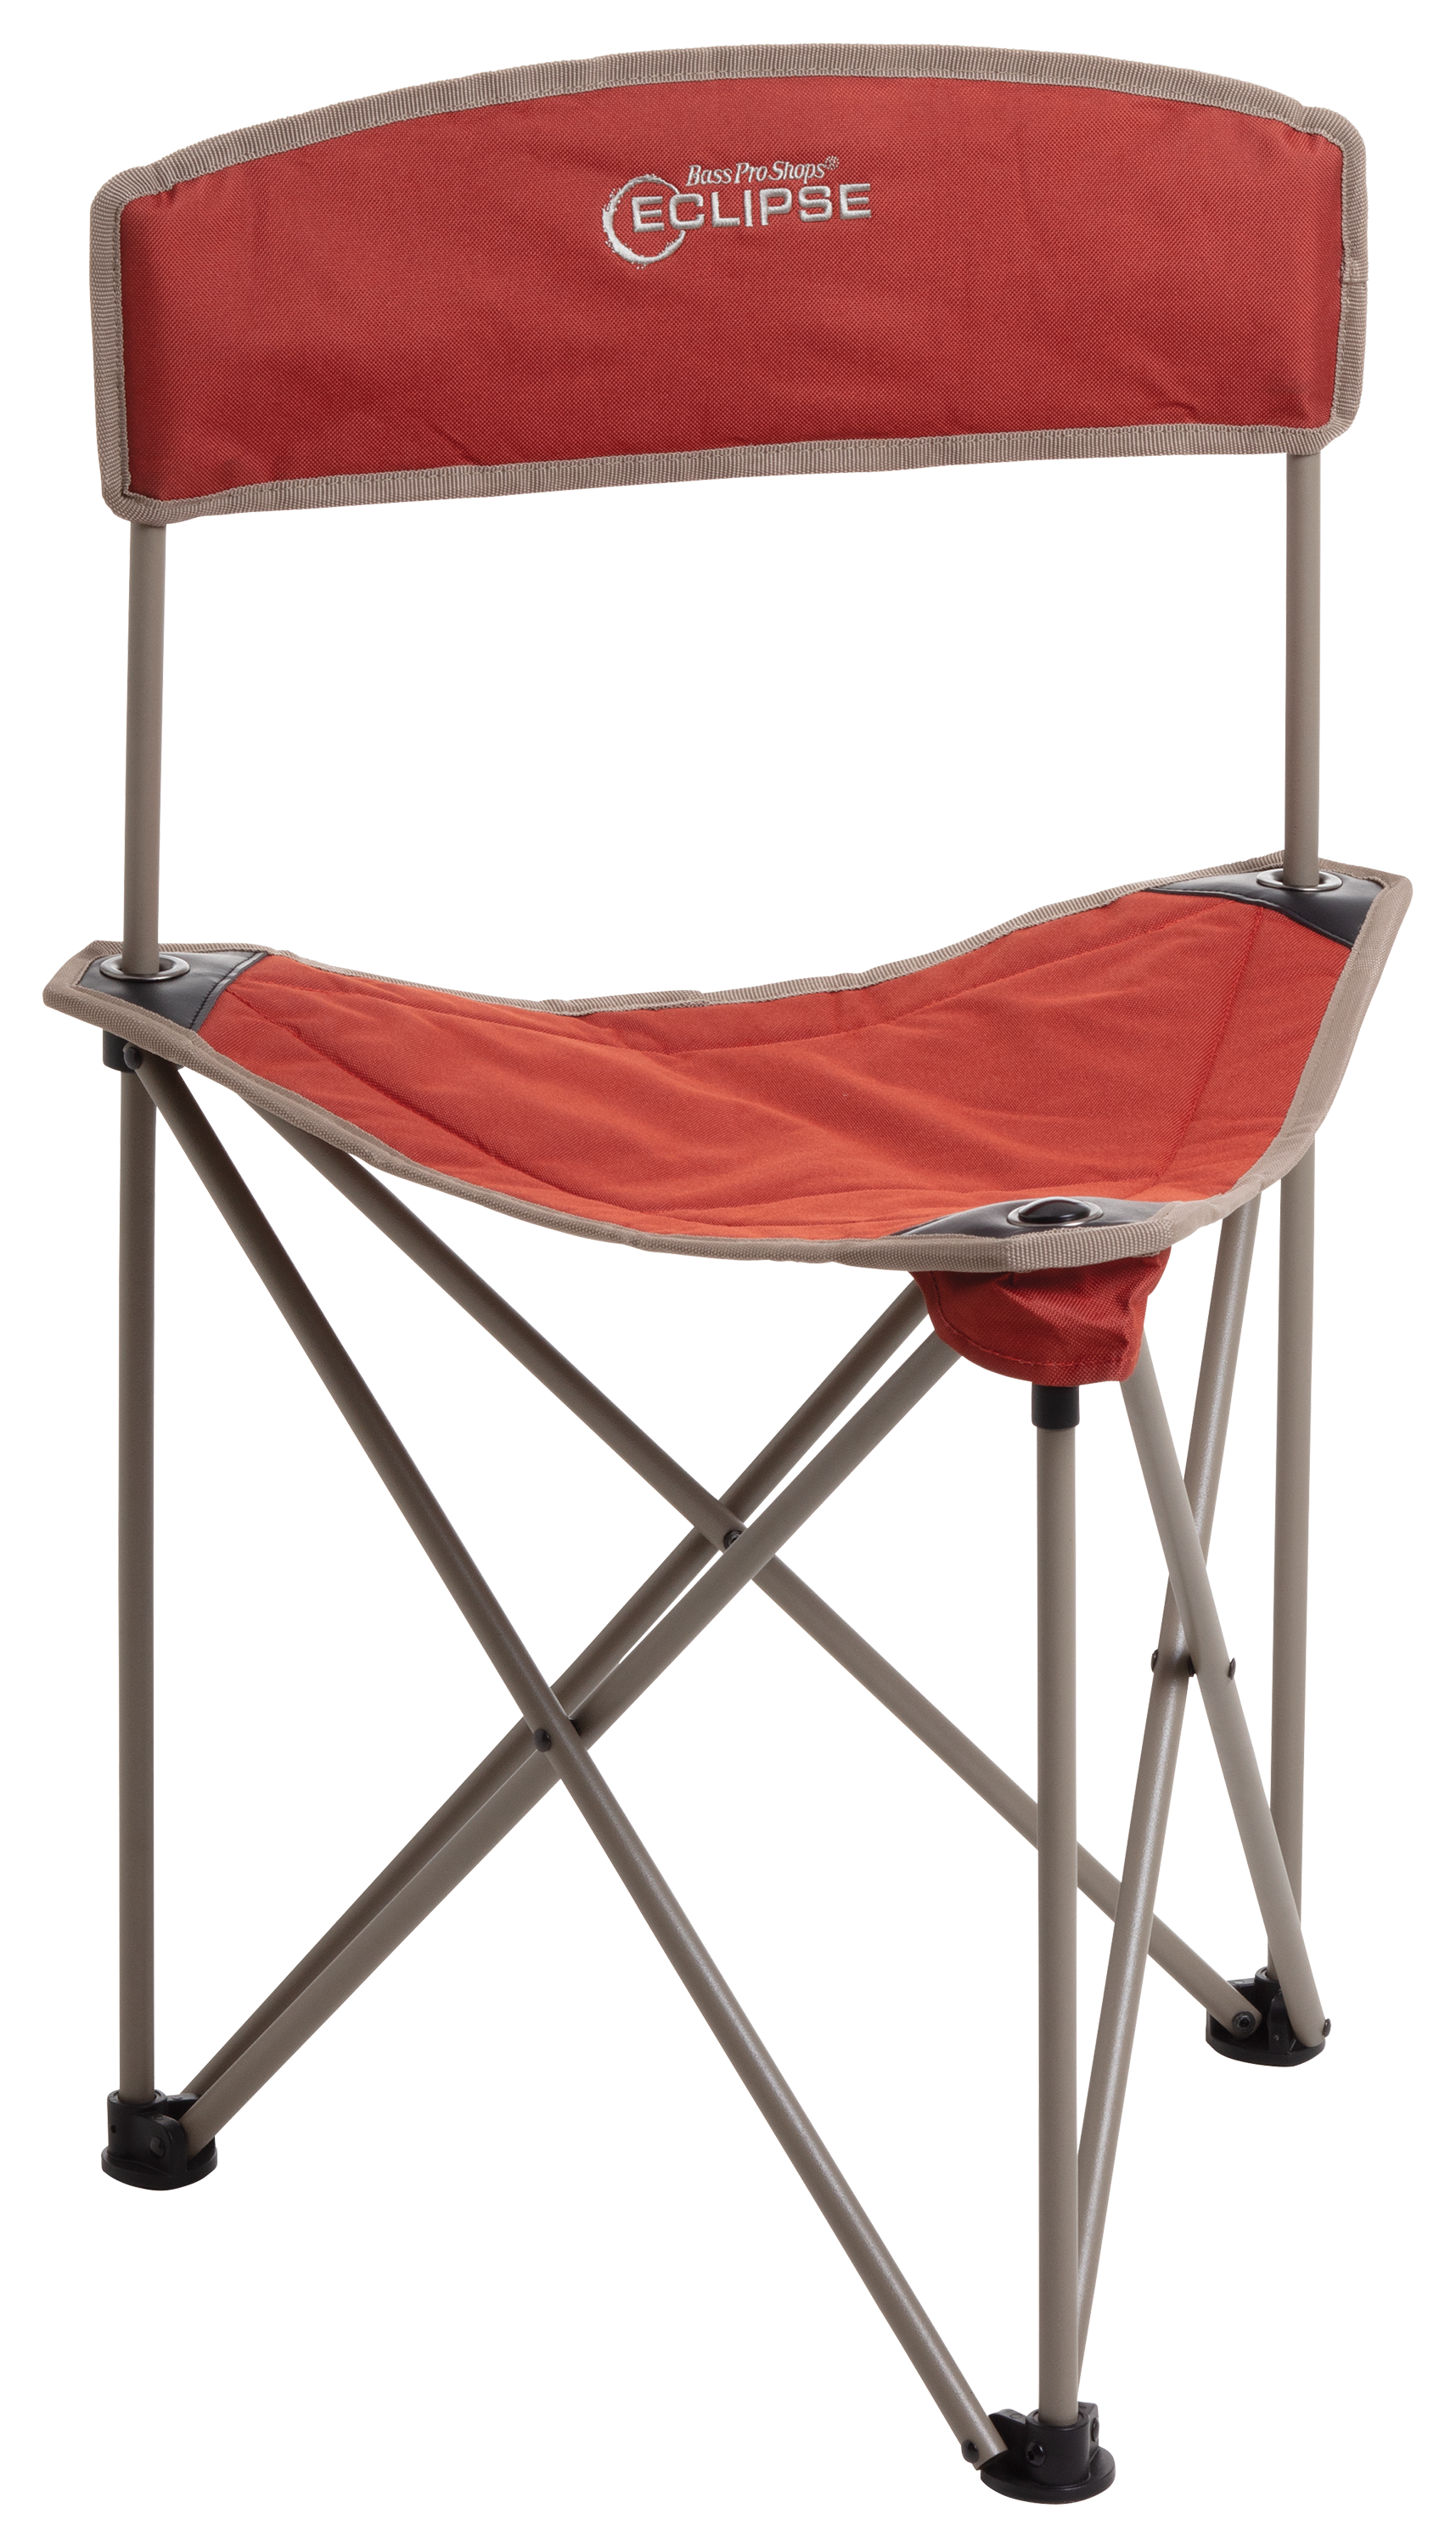 Bass Pro Shops Eclipse Basic Tripod Chair with Backrest